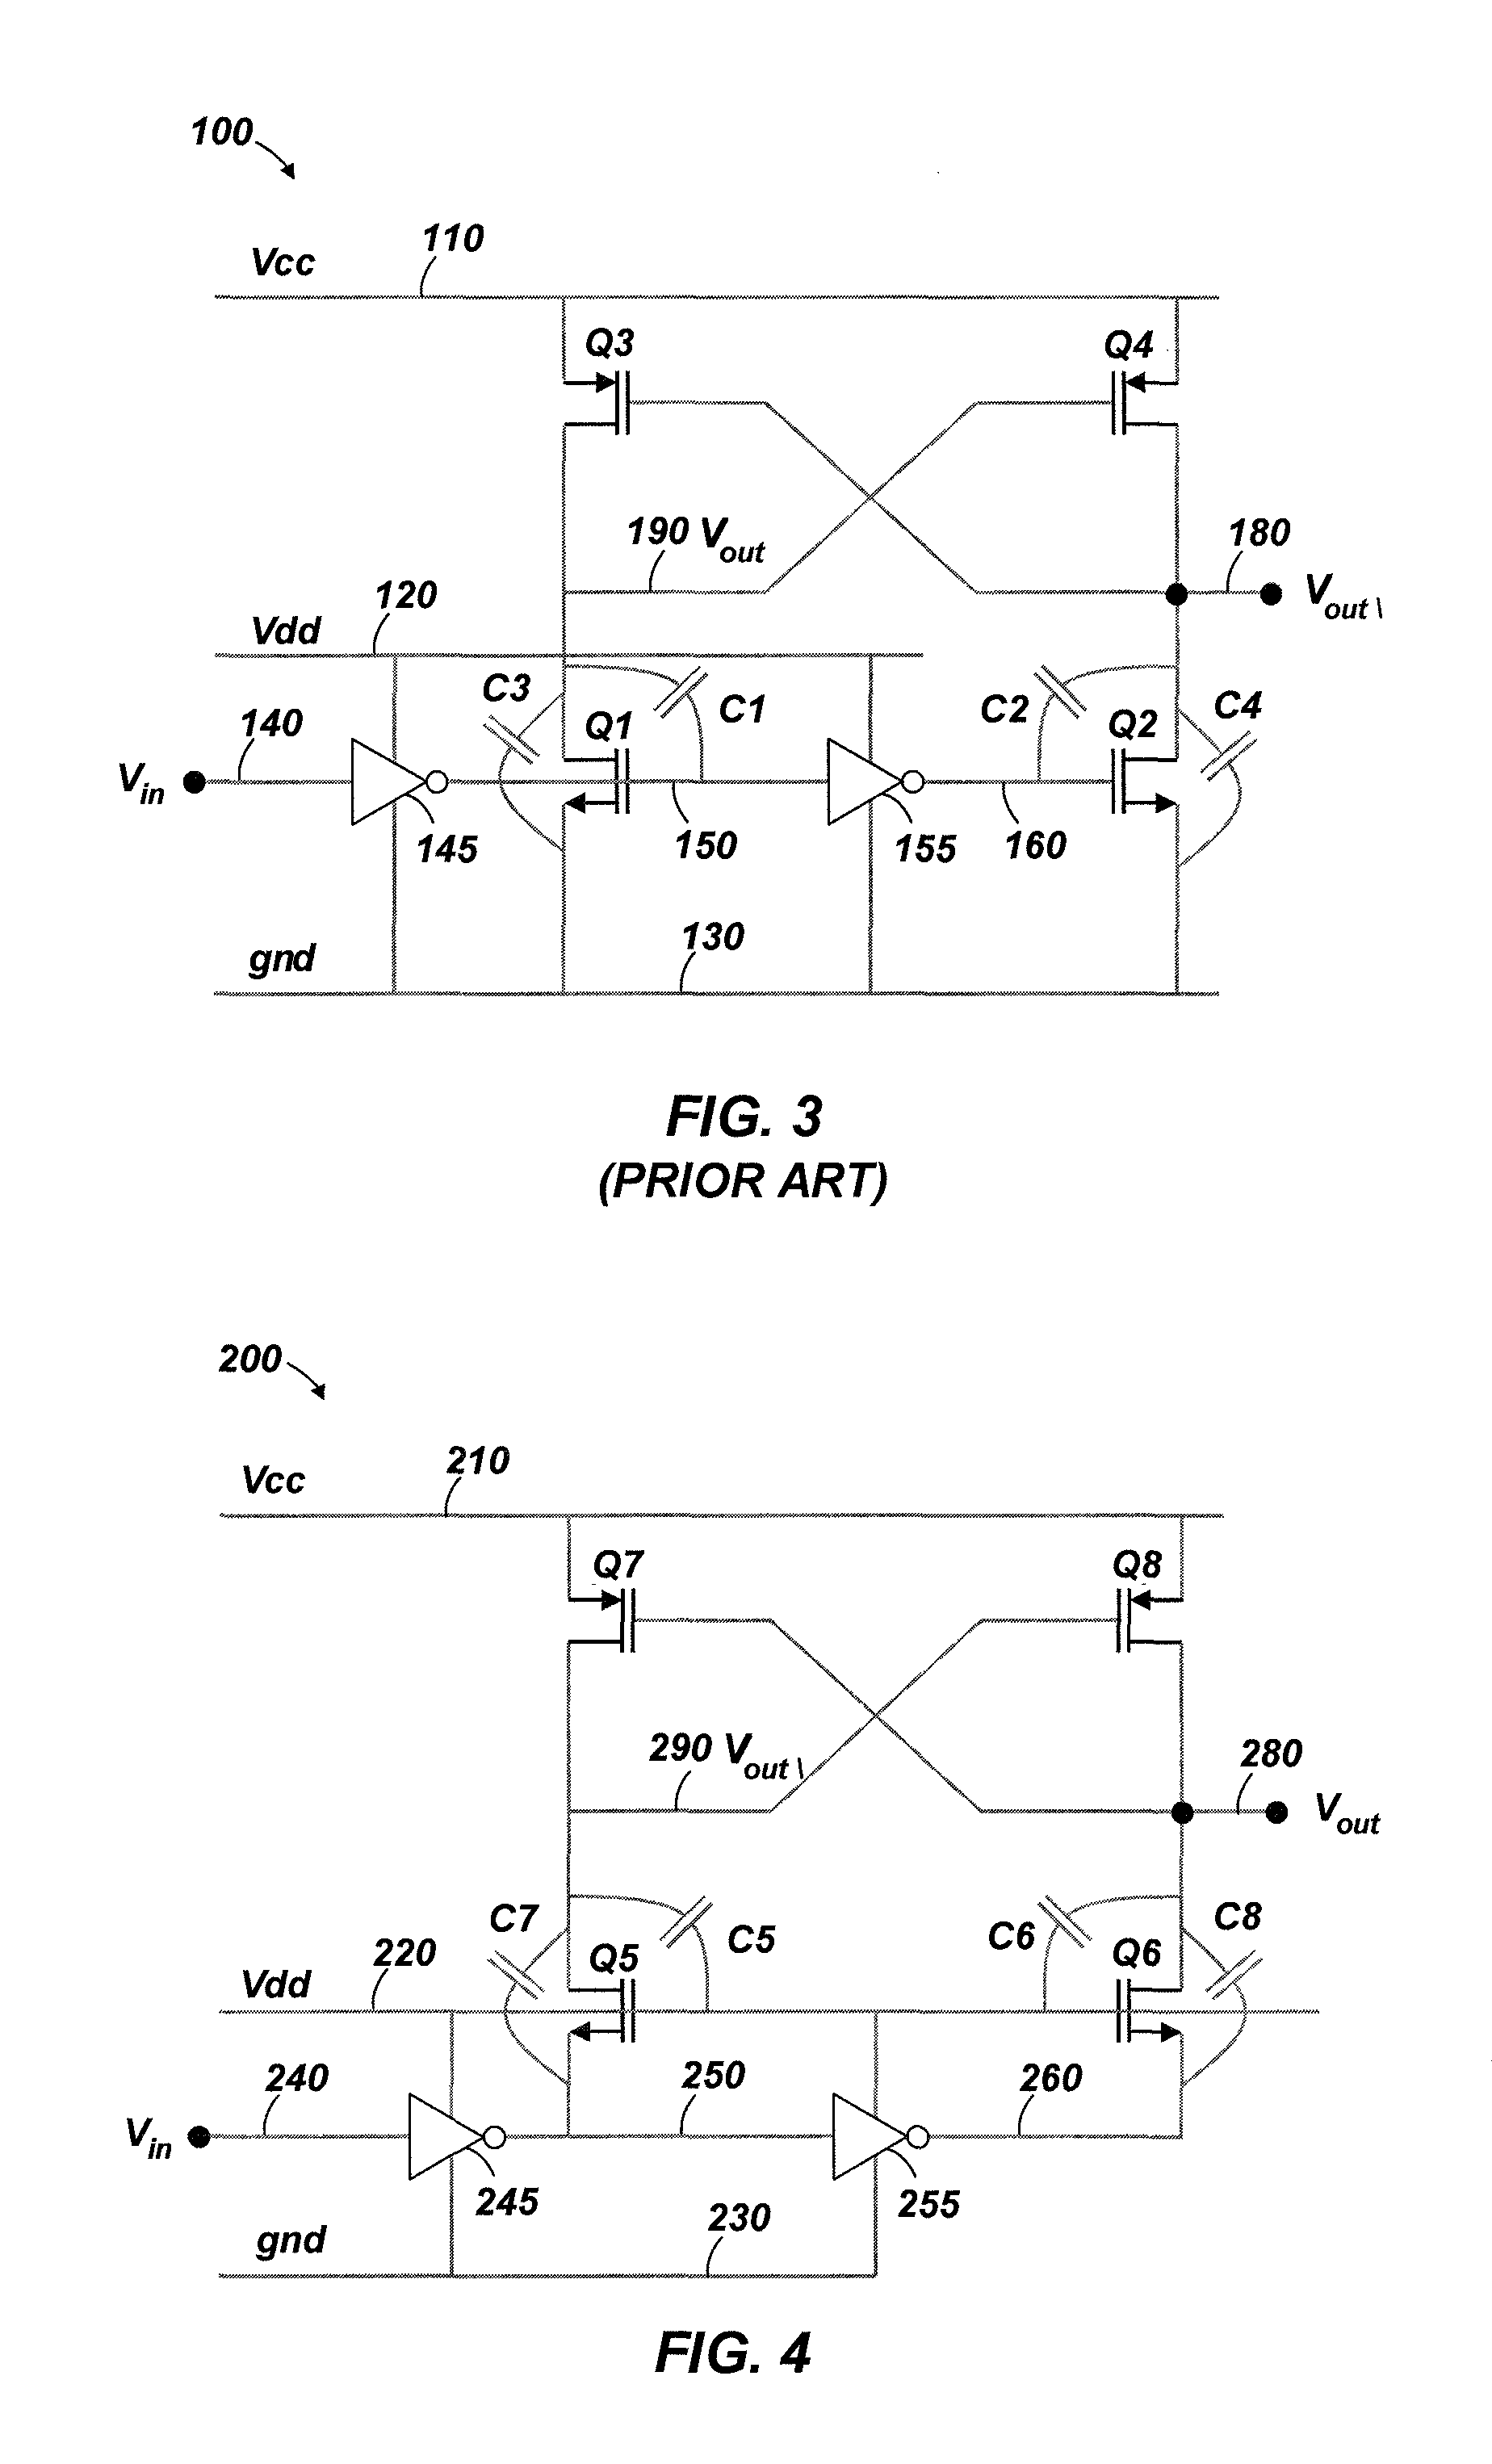 Voltage level shifting apparatuses and methods